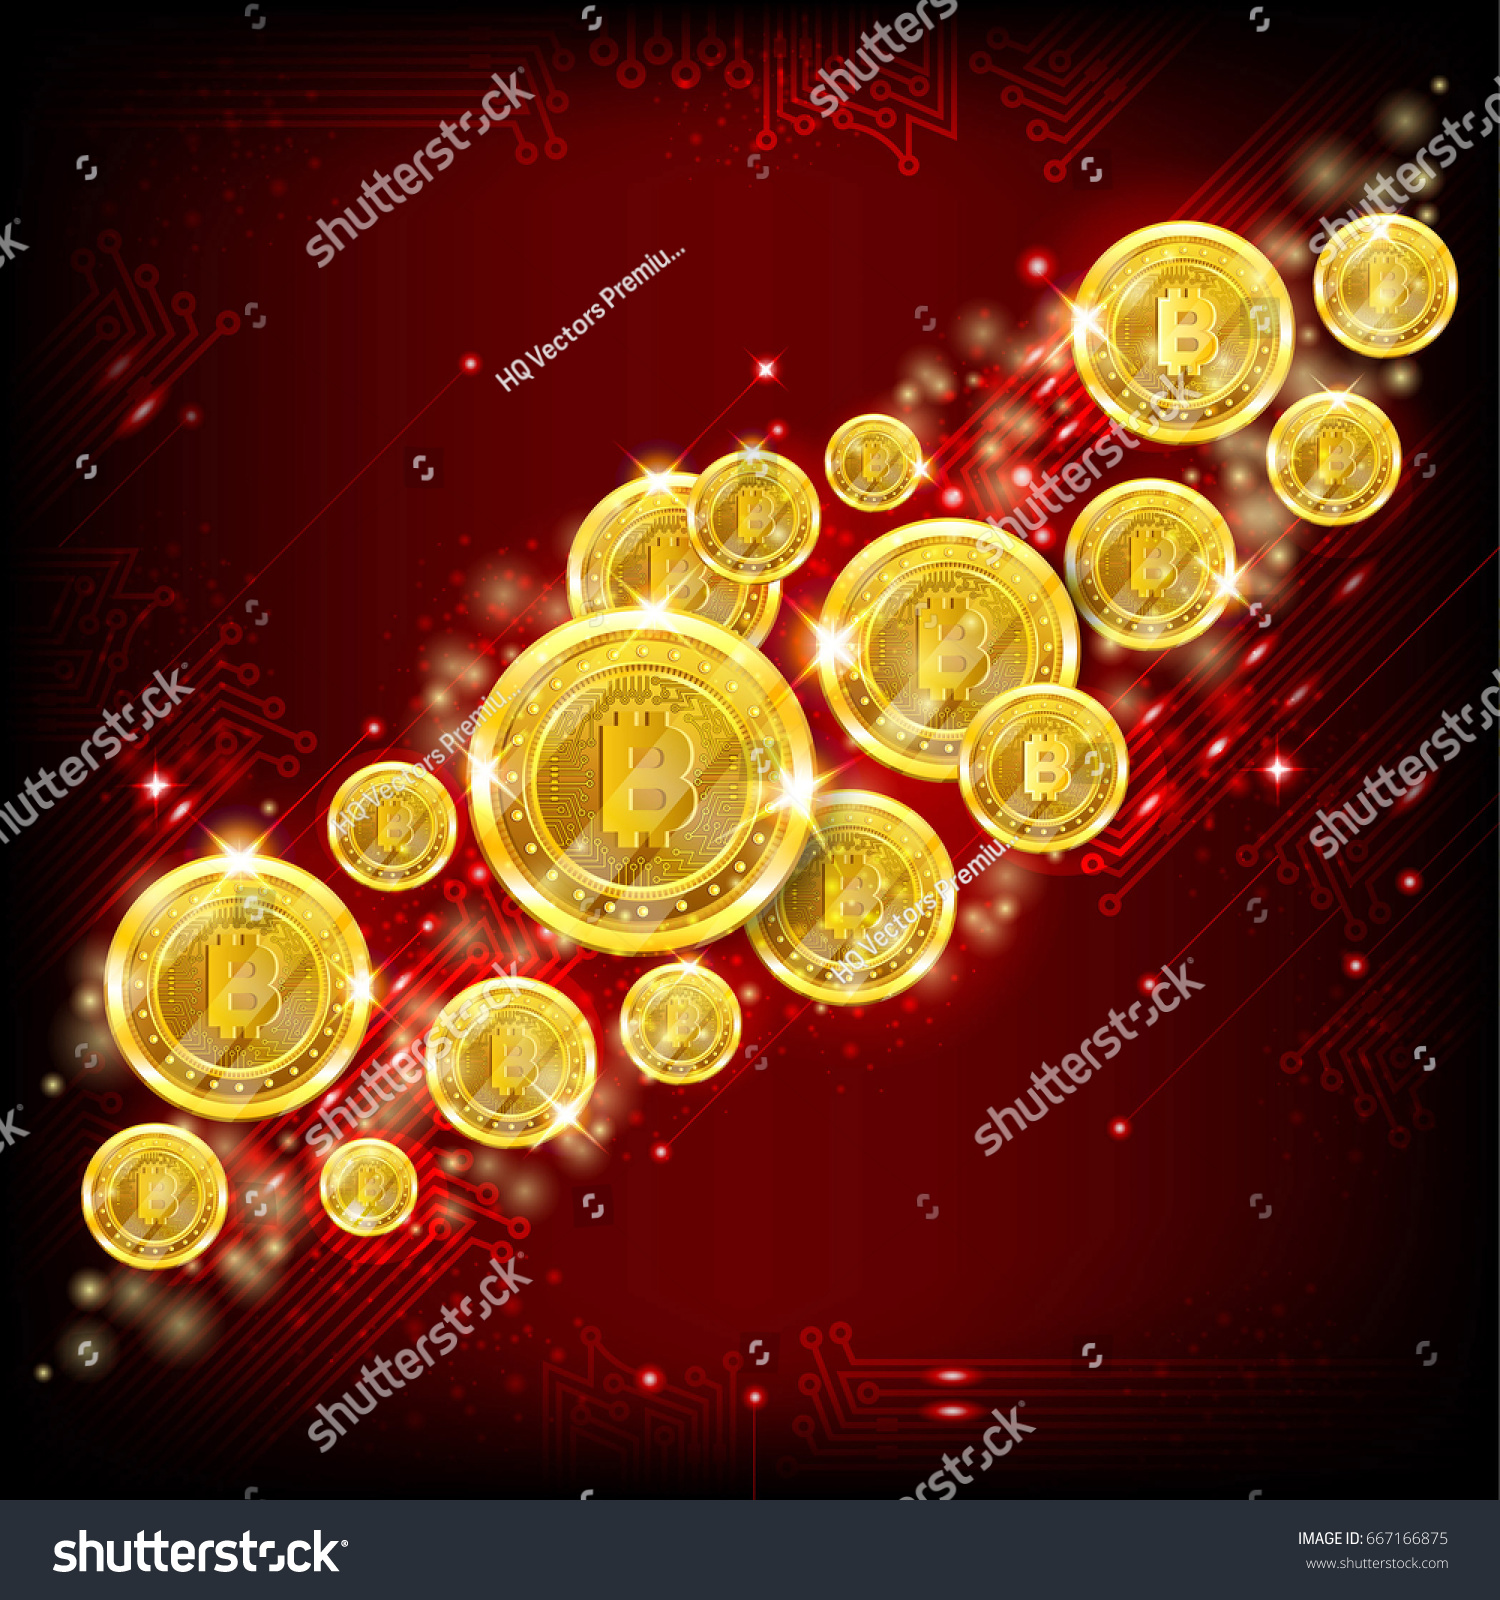 SVG of Golden bit coins flying on red background. Abstract vector glossy red background svg